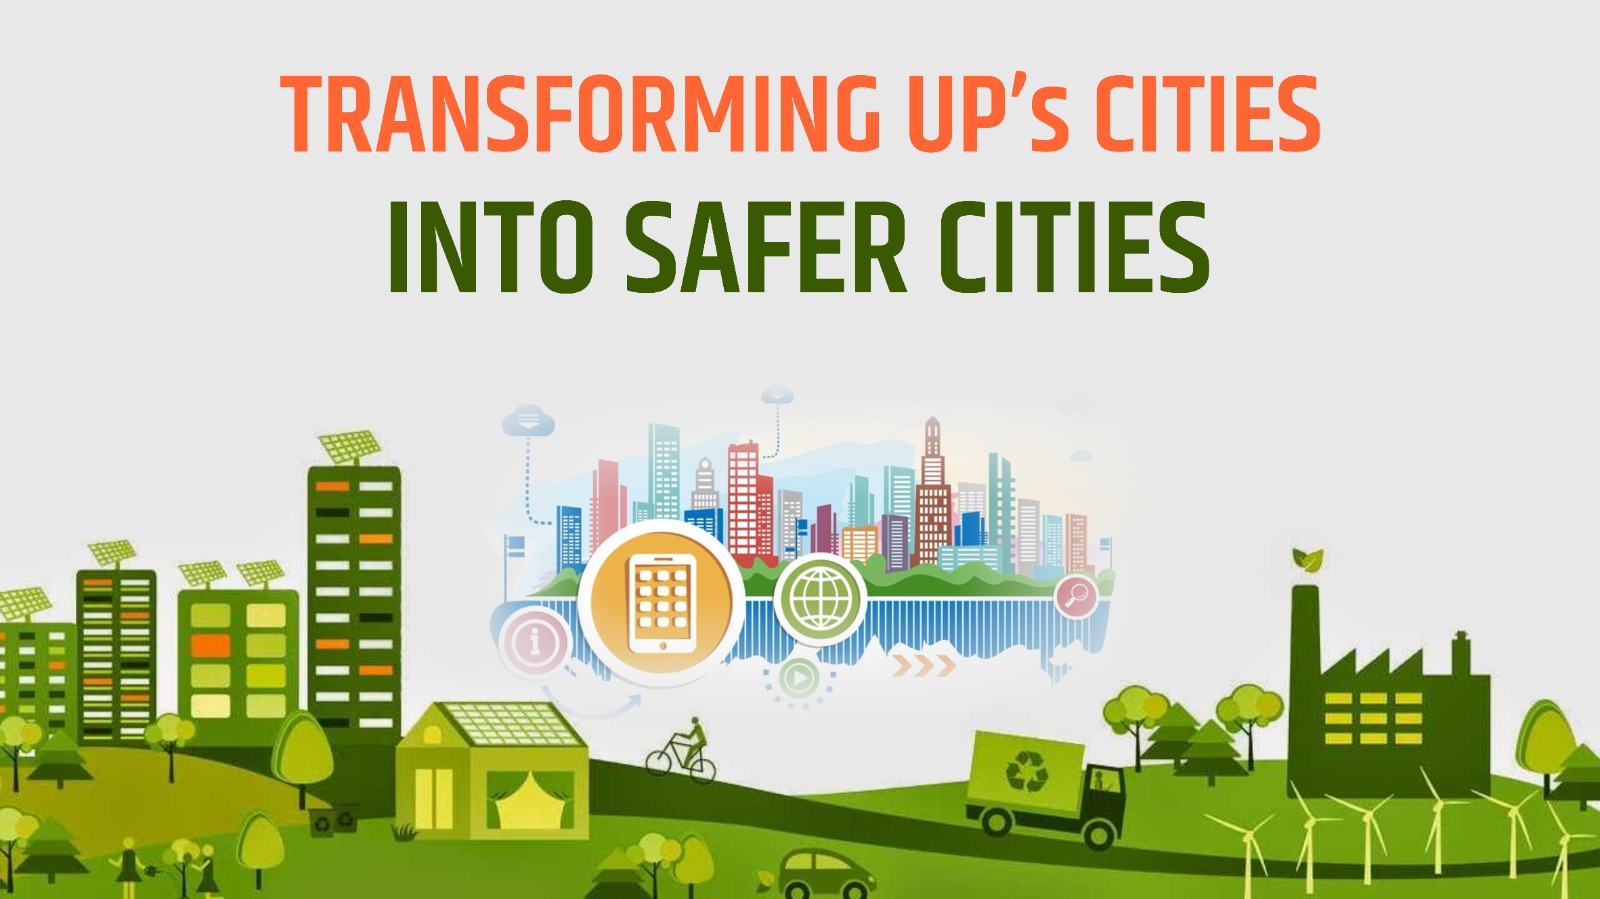 Transforming UP cities into safer cities